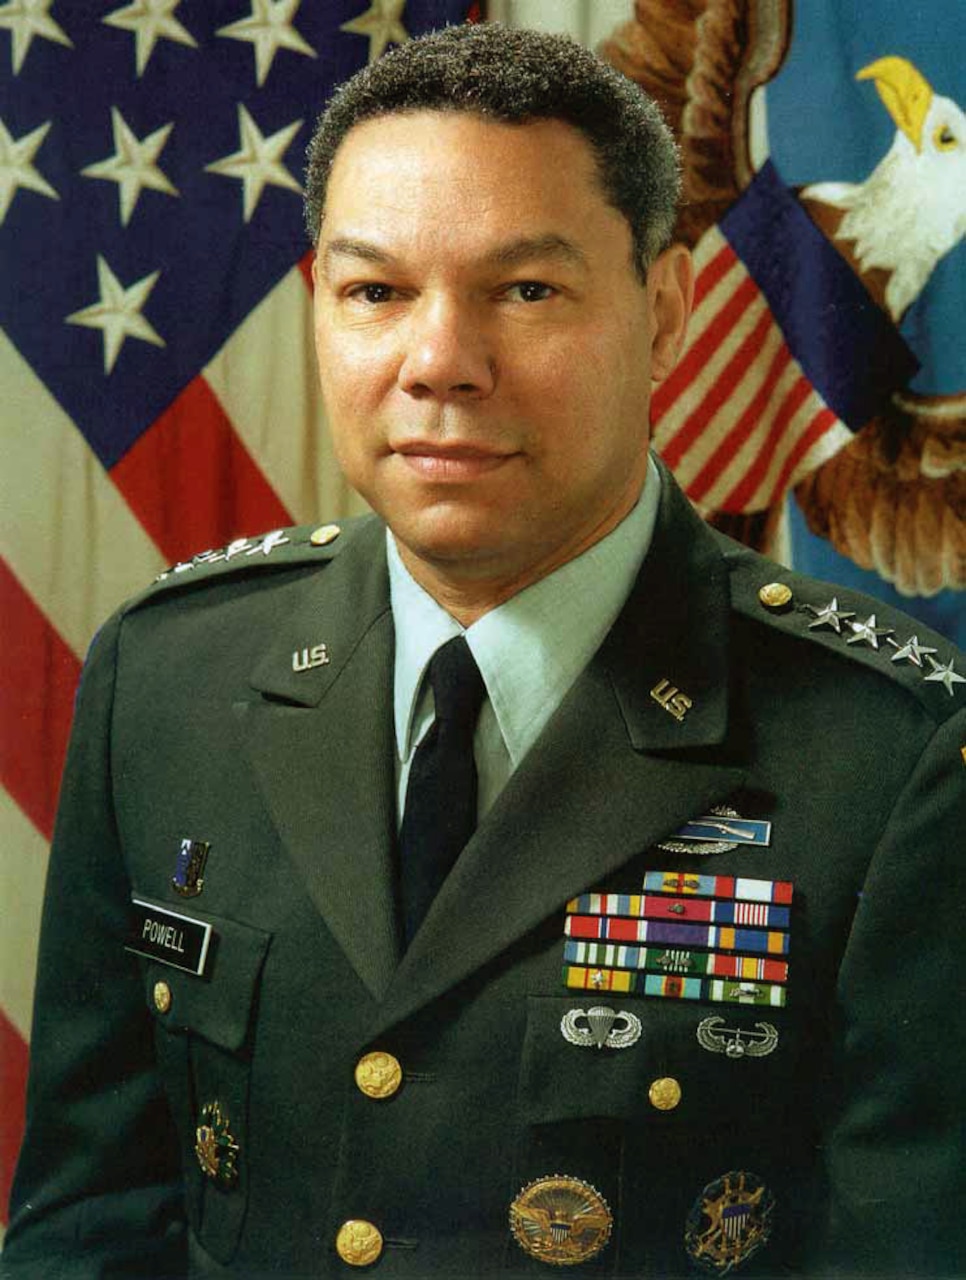 Gen. Colin L. Powell served as Chairman of the Joint Chiefs of Staff and Secretary of State.